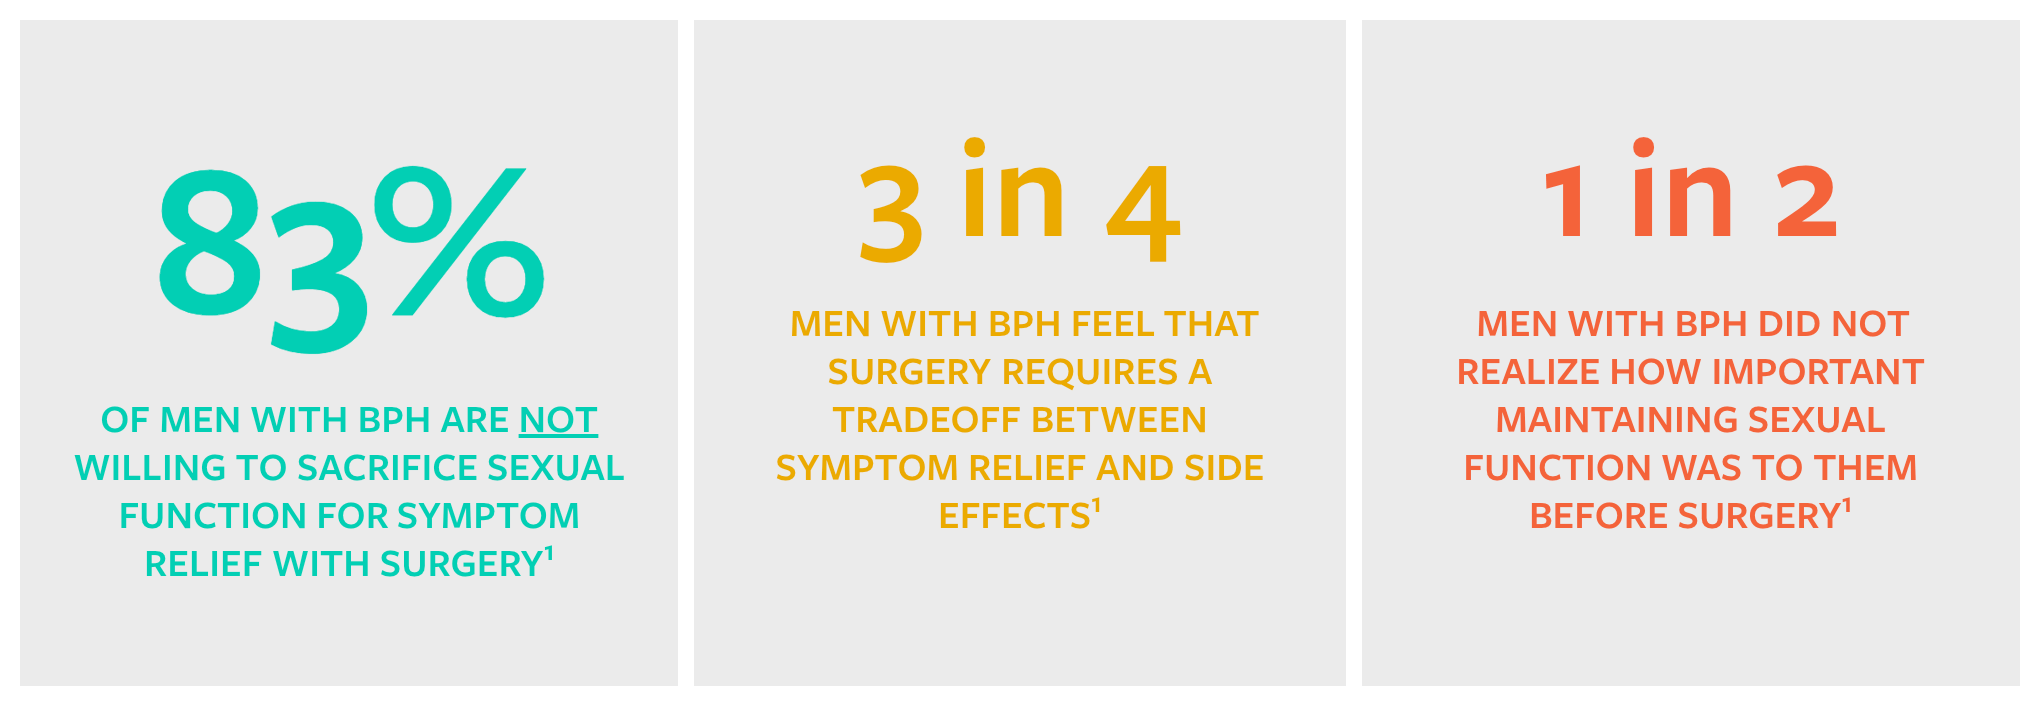 83% of men with BPH are not willing to sacrifice sexual function for symptom relief with surgery. 3 in 4 men with BPH feel that surgery requires a tradeoff before symptom relief and side effects. 1 in 2 men with BPH did not realize ho important maintaining sexual function was to them before surgery (1).